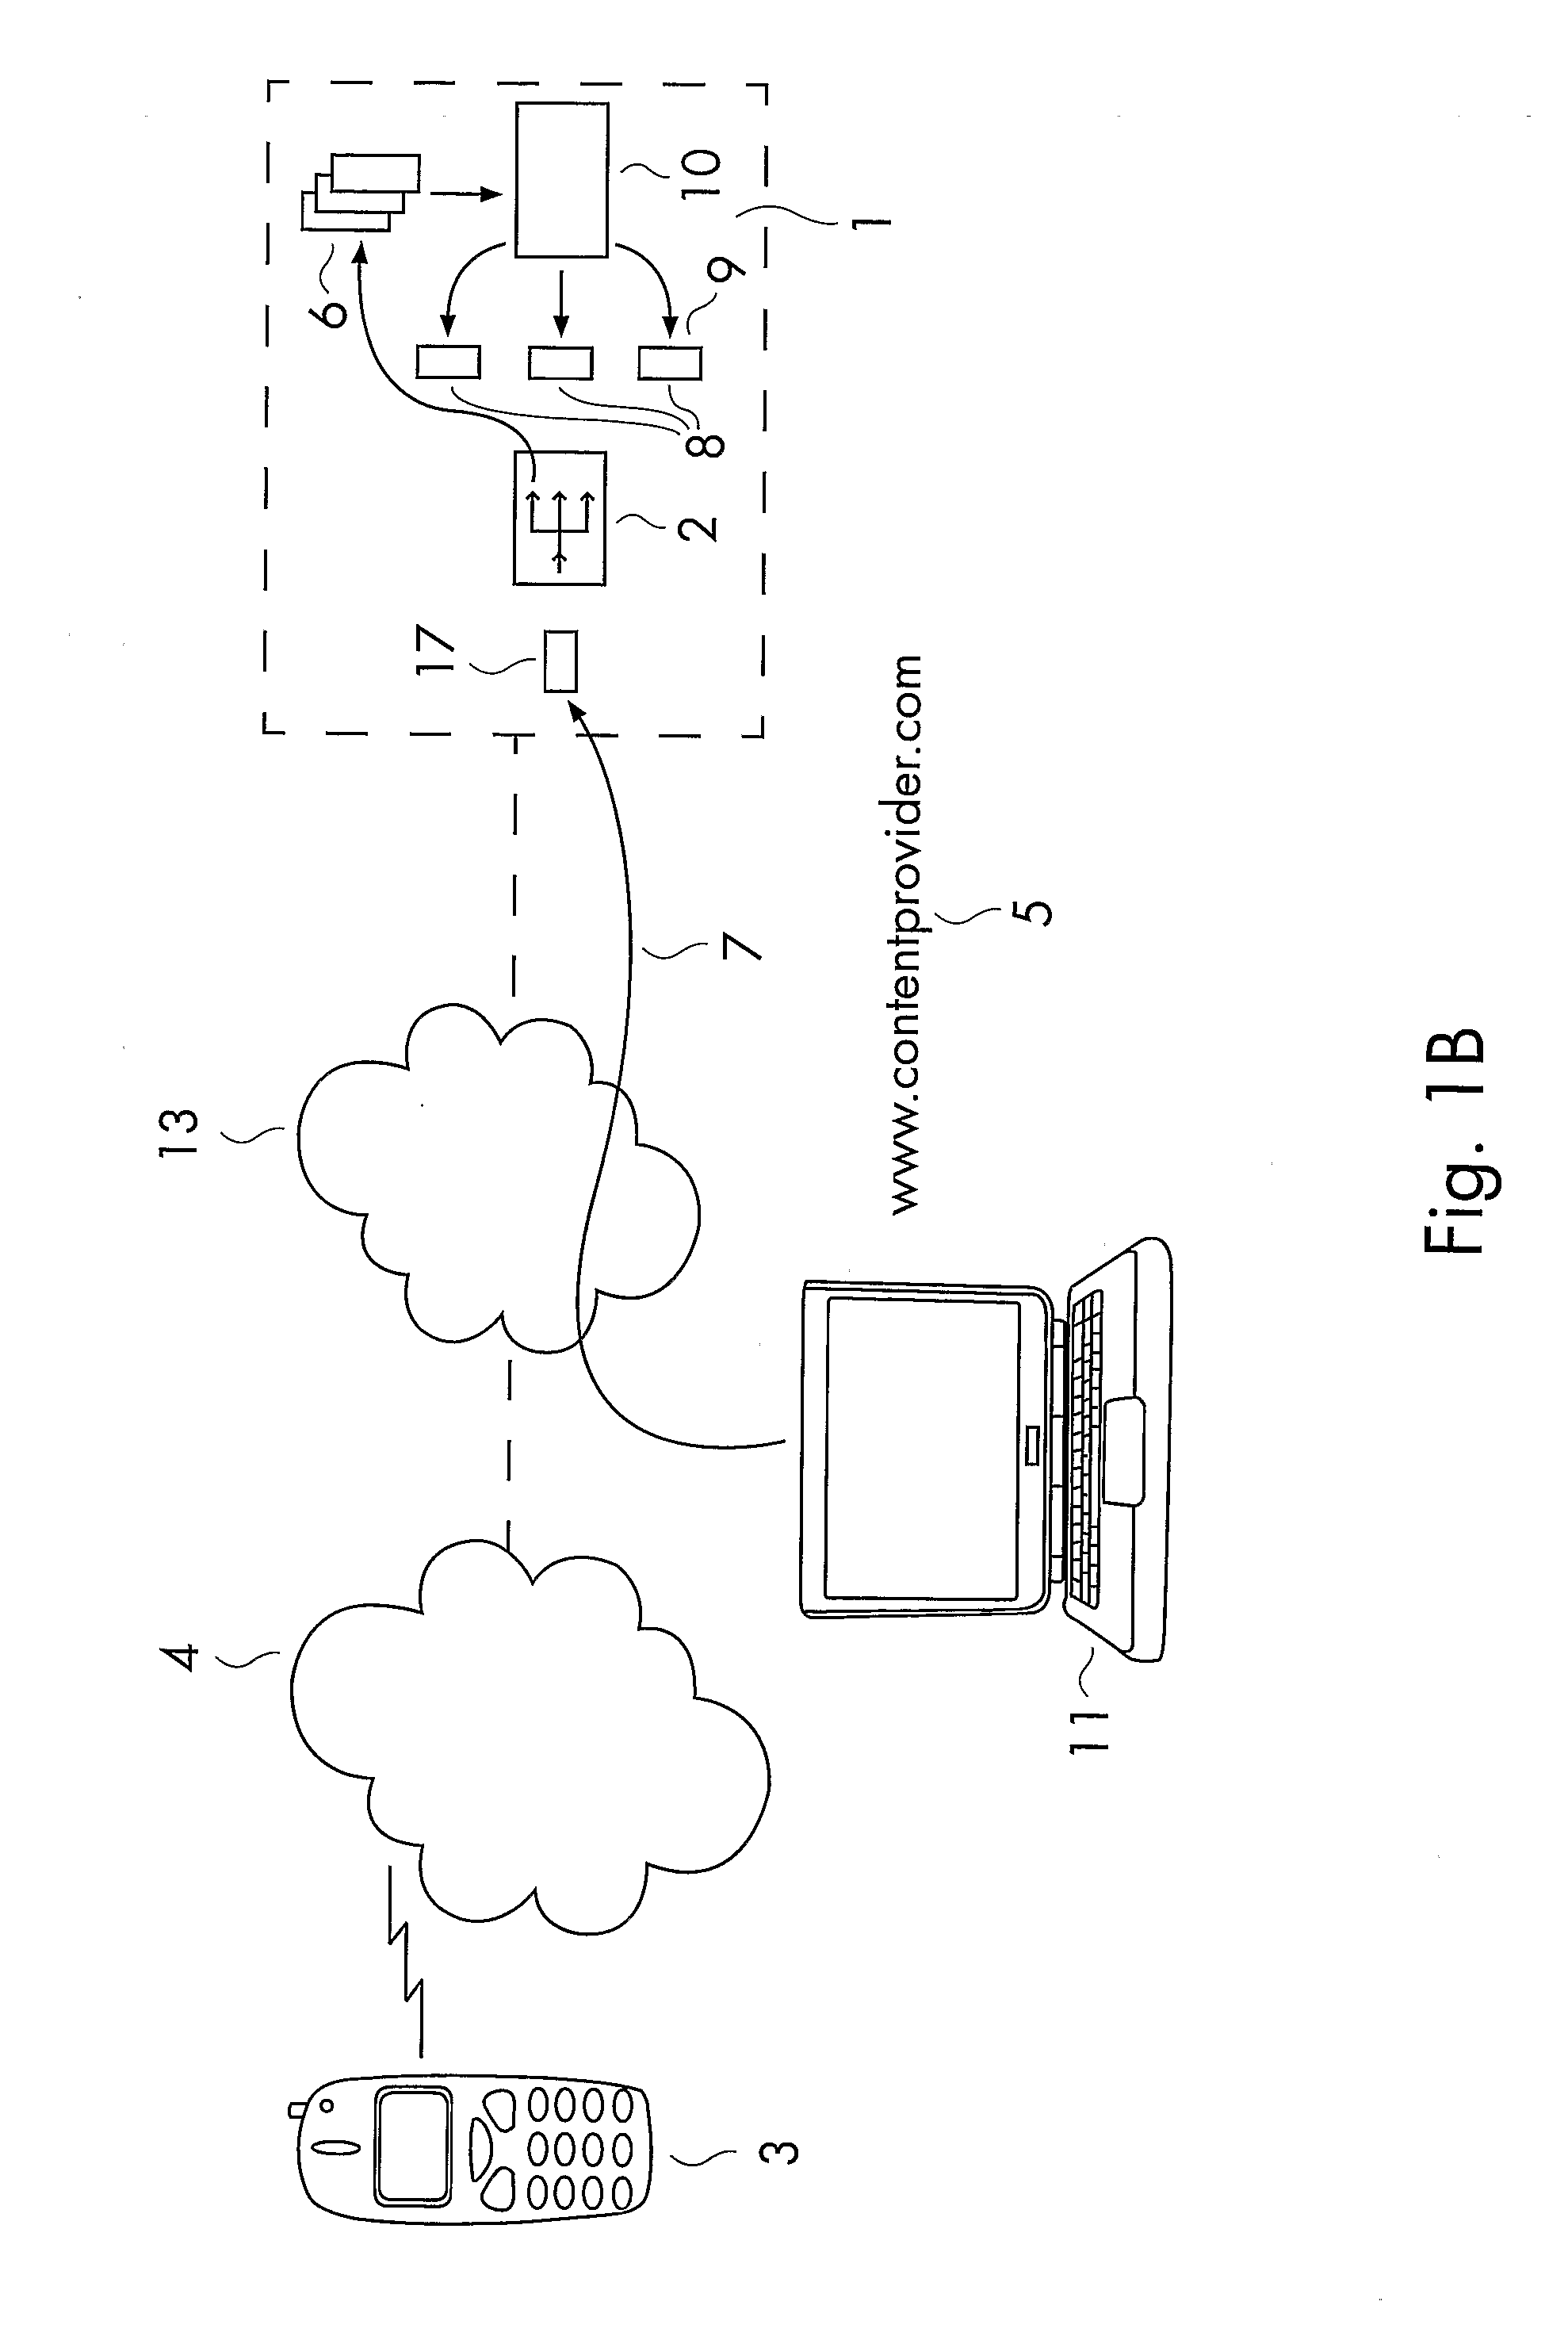 Terminal Independent Addressing System for Access to a Web Page Via a Public Mobile Network